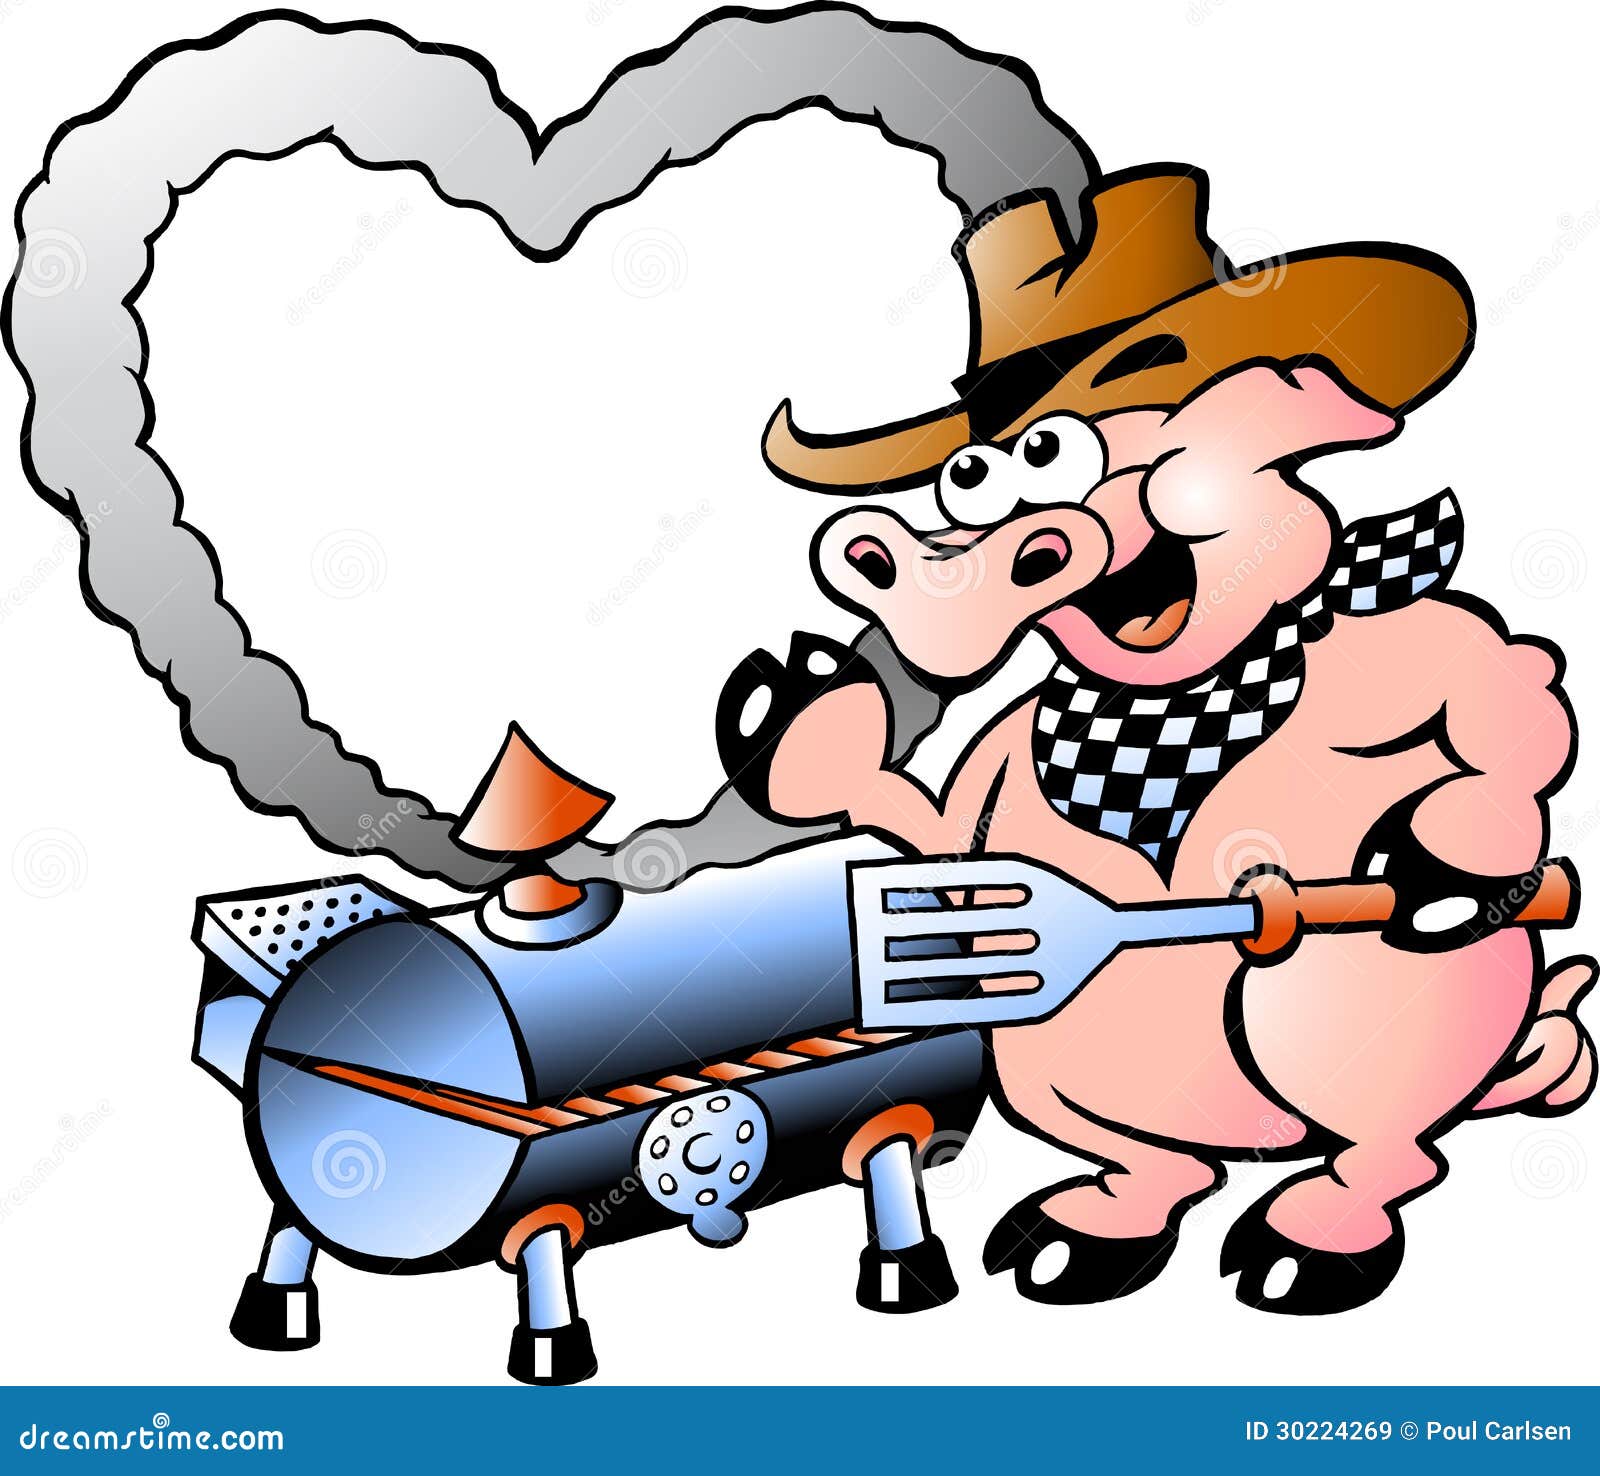 barbecue clipart pig - photo #4